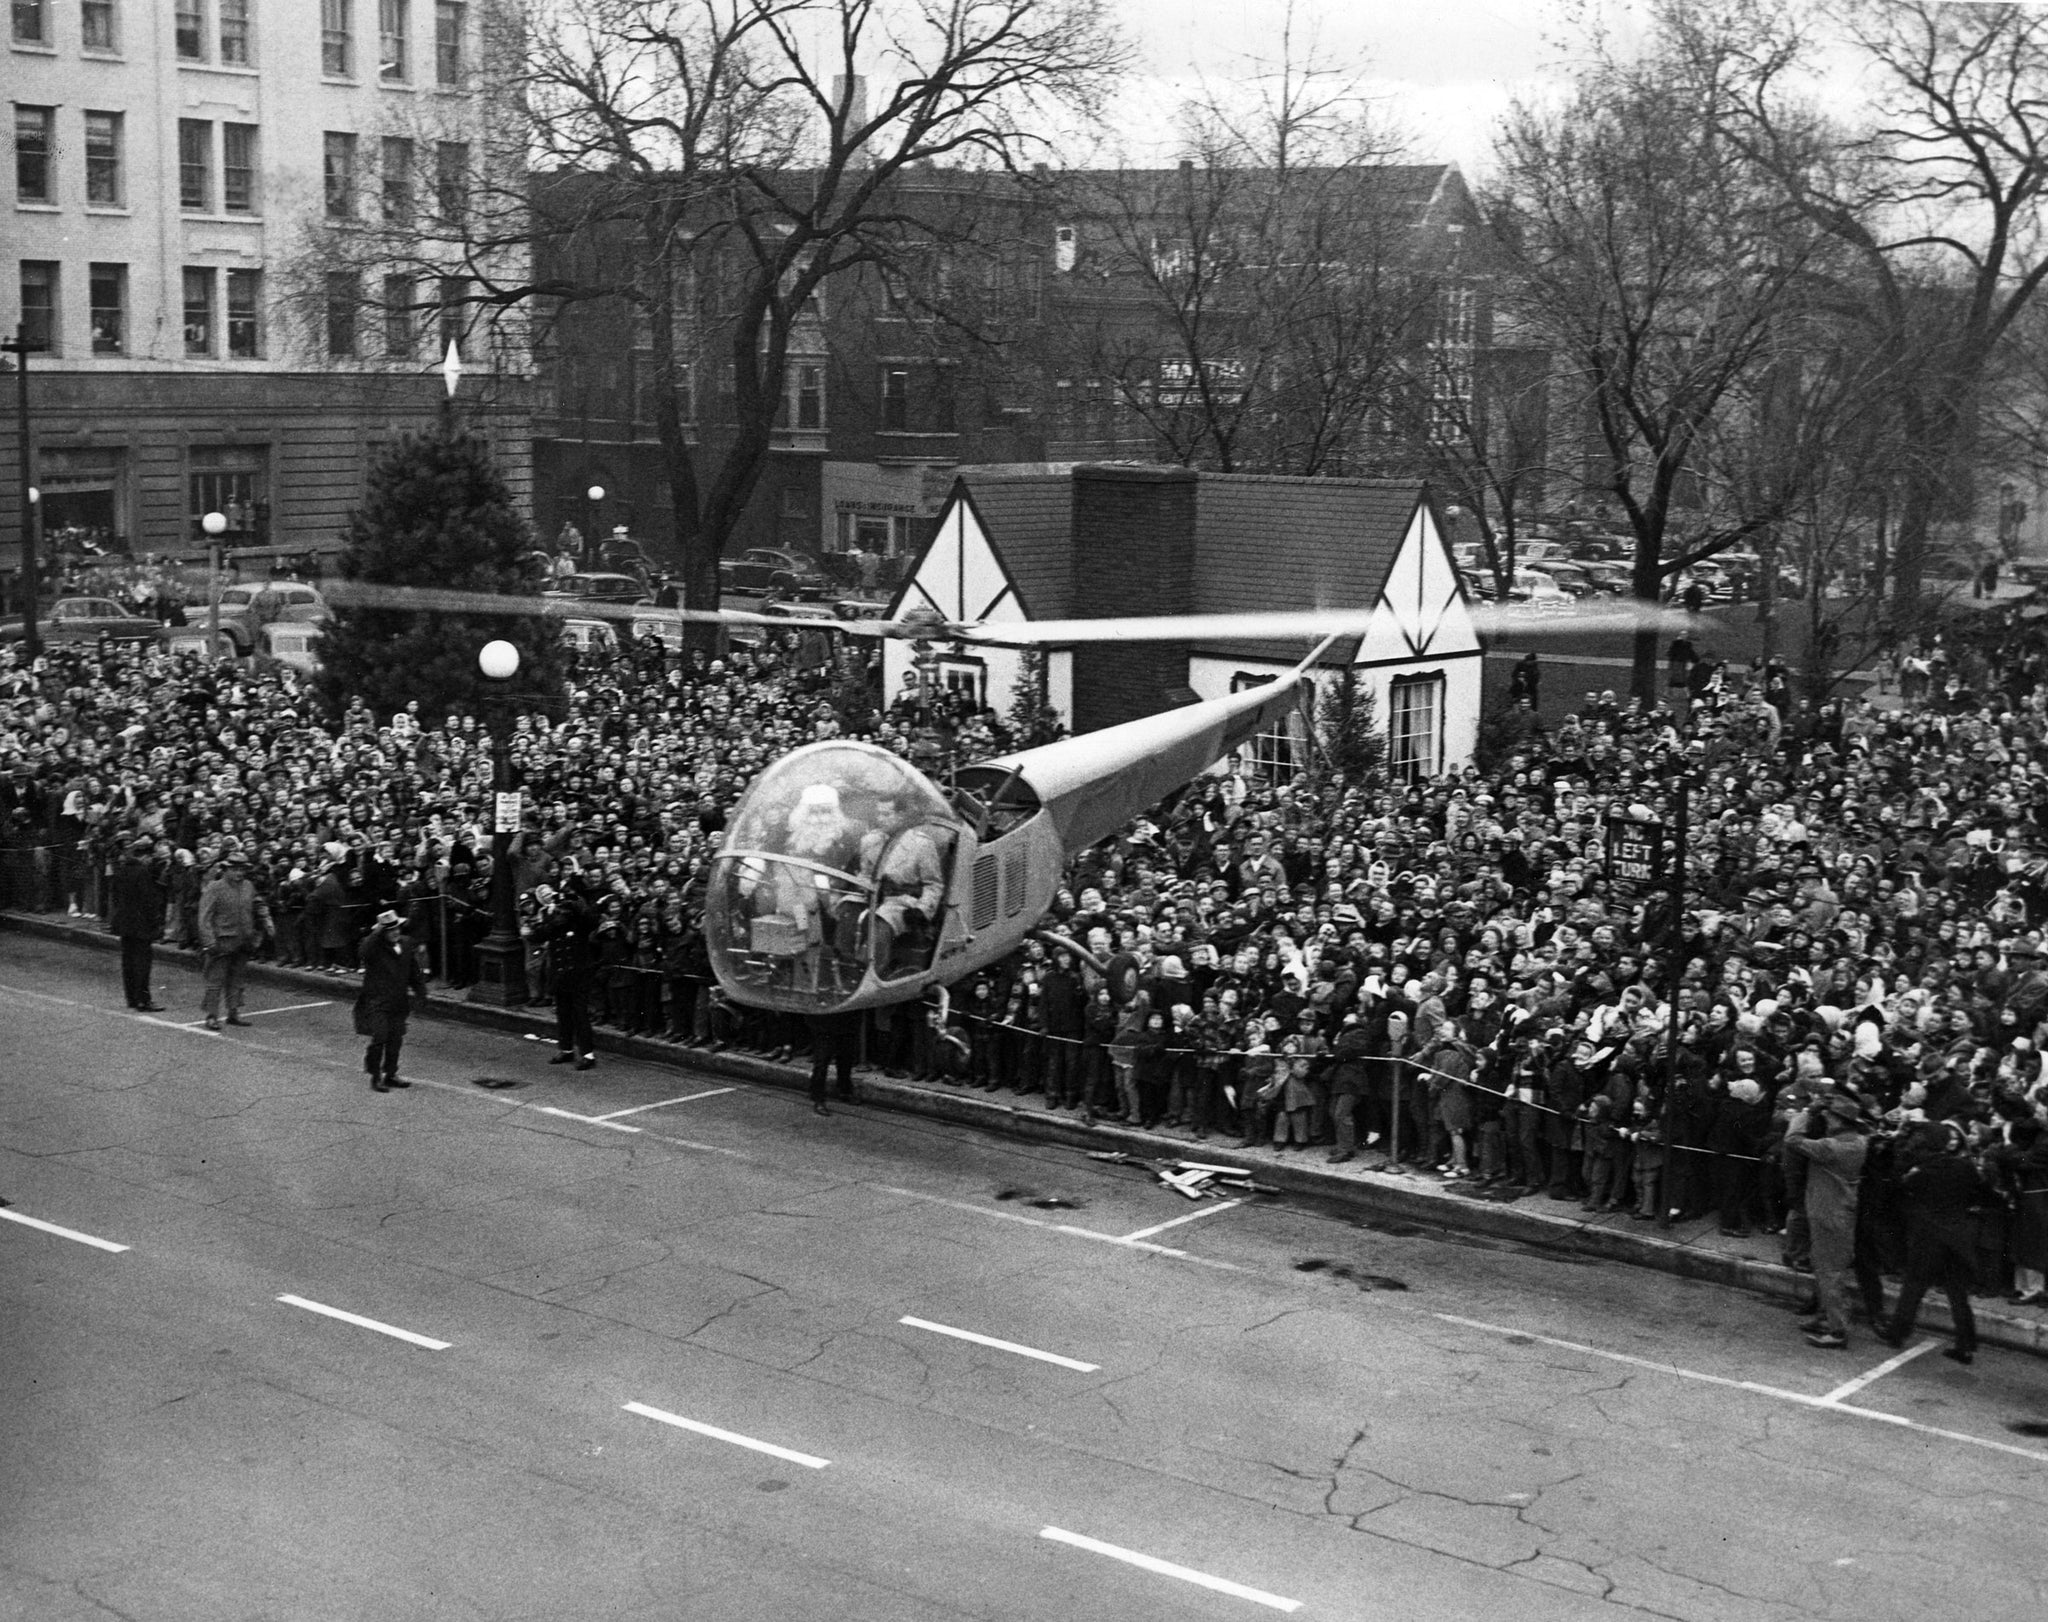 A crowd watching as Santa lands on Water Street in a helicopter, 1949. -- Herald & Review